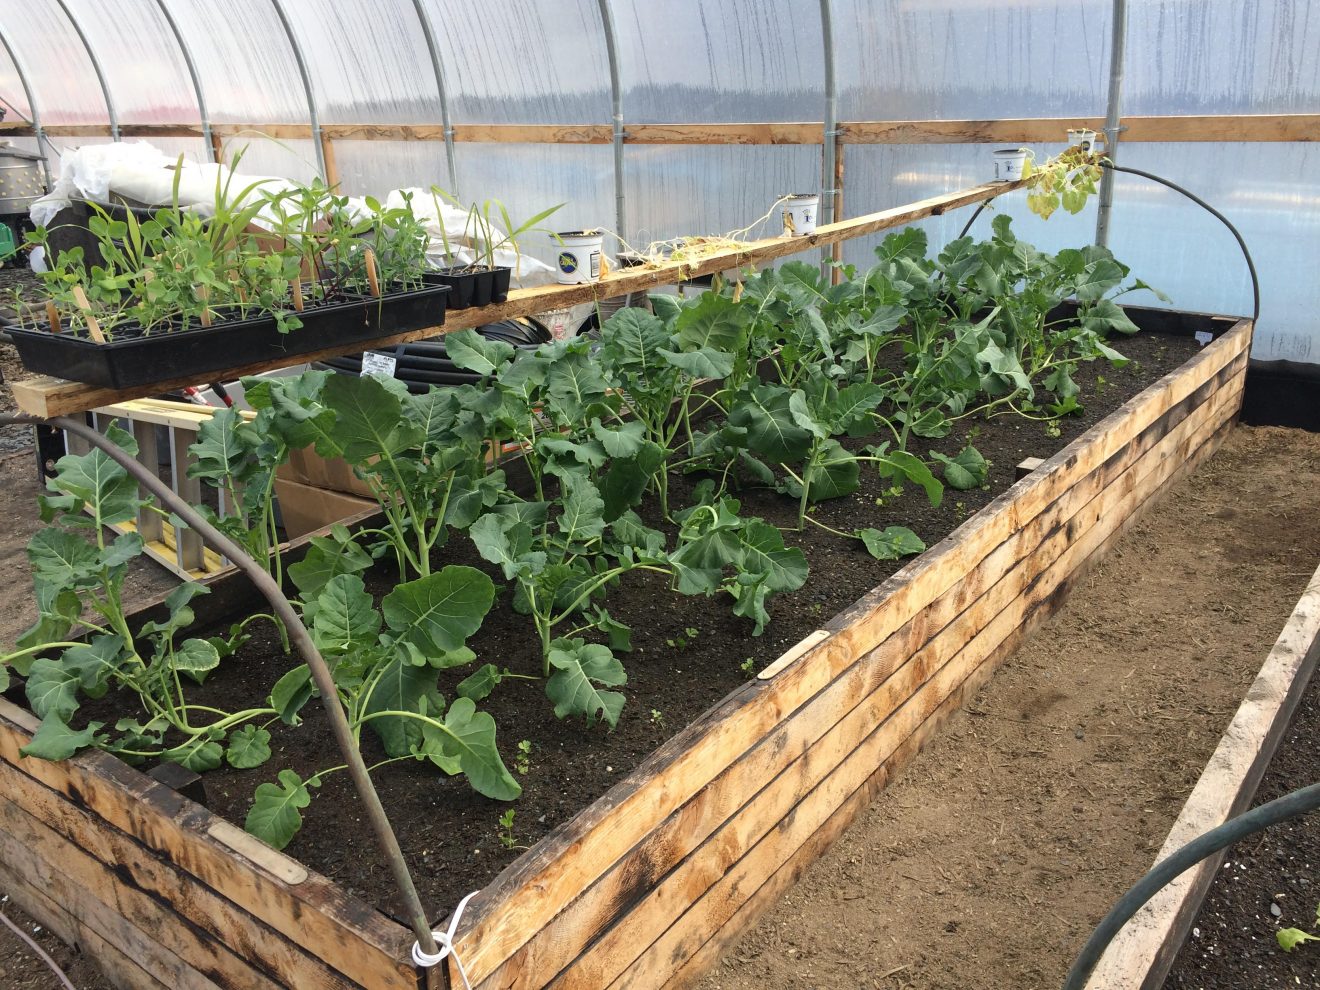 Raised beds inside a high tunnel at Port Lions